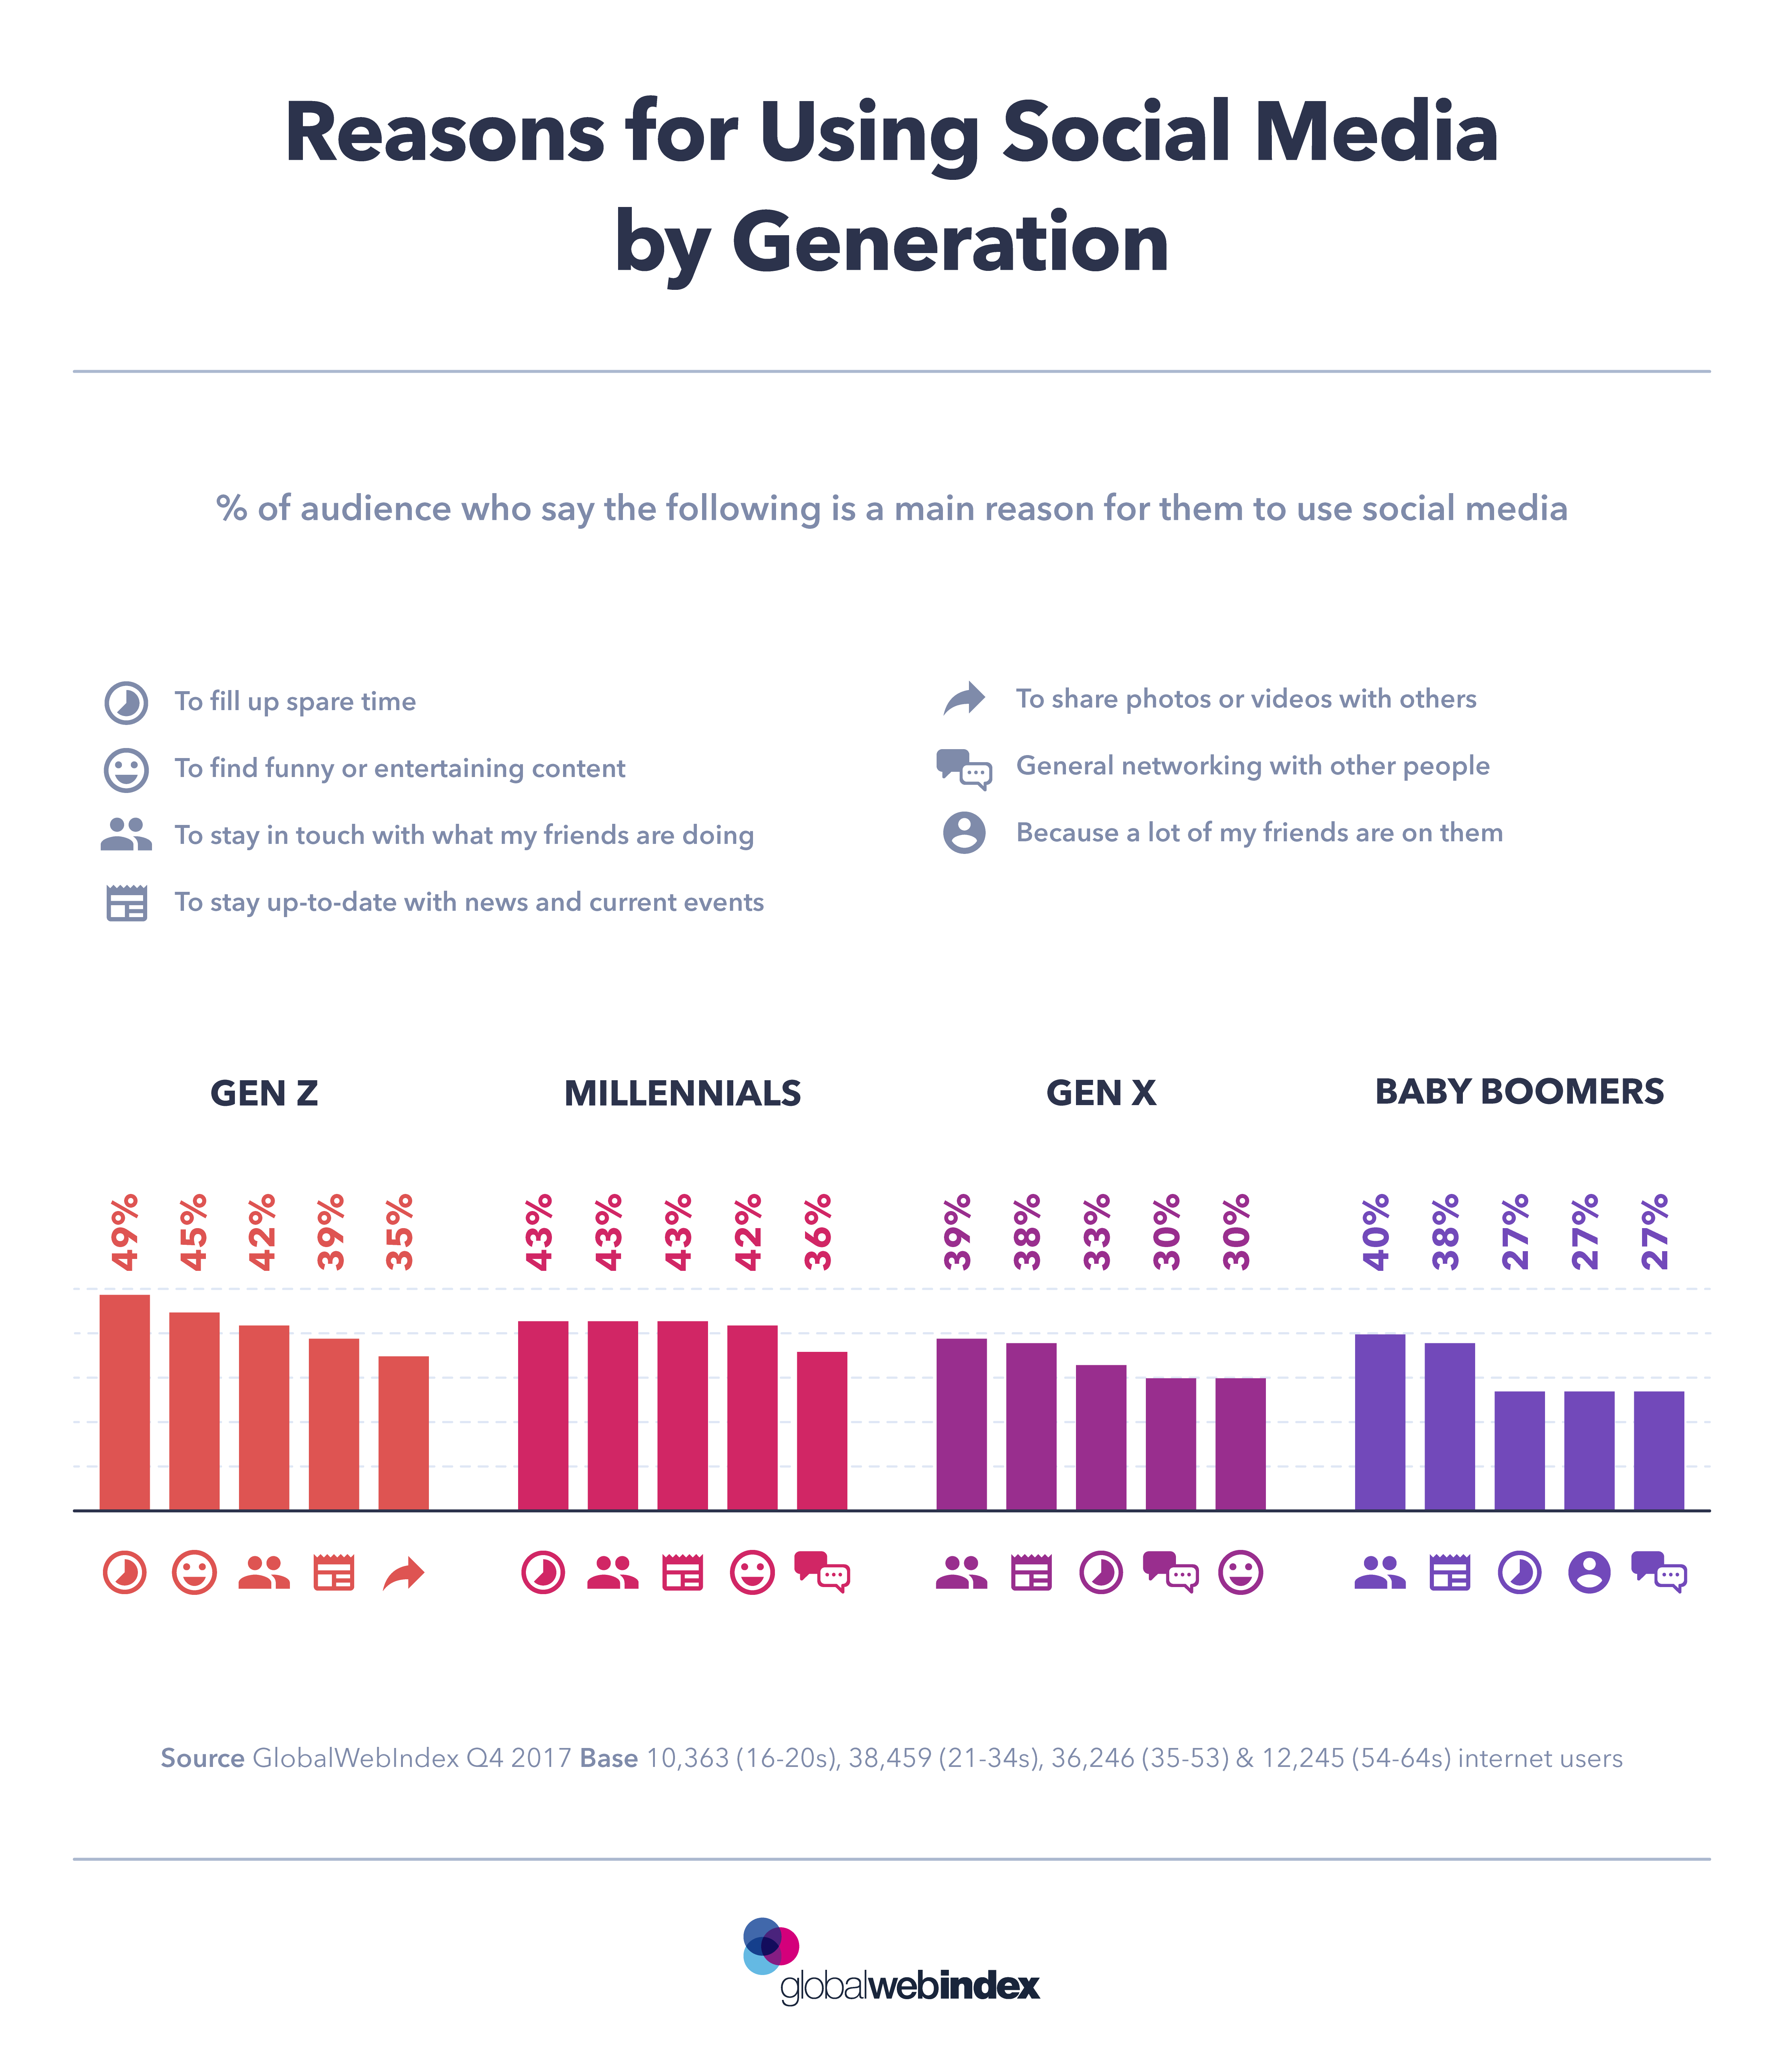 Reasons for Social Media by Generation - GWI